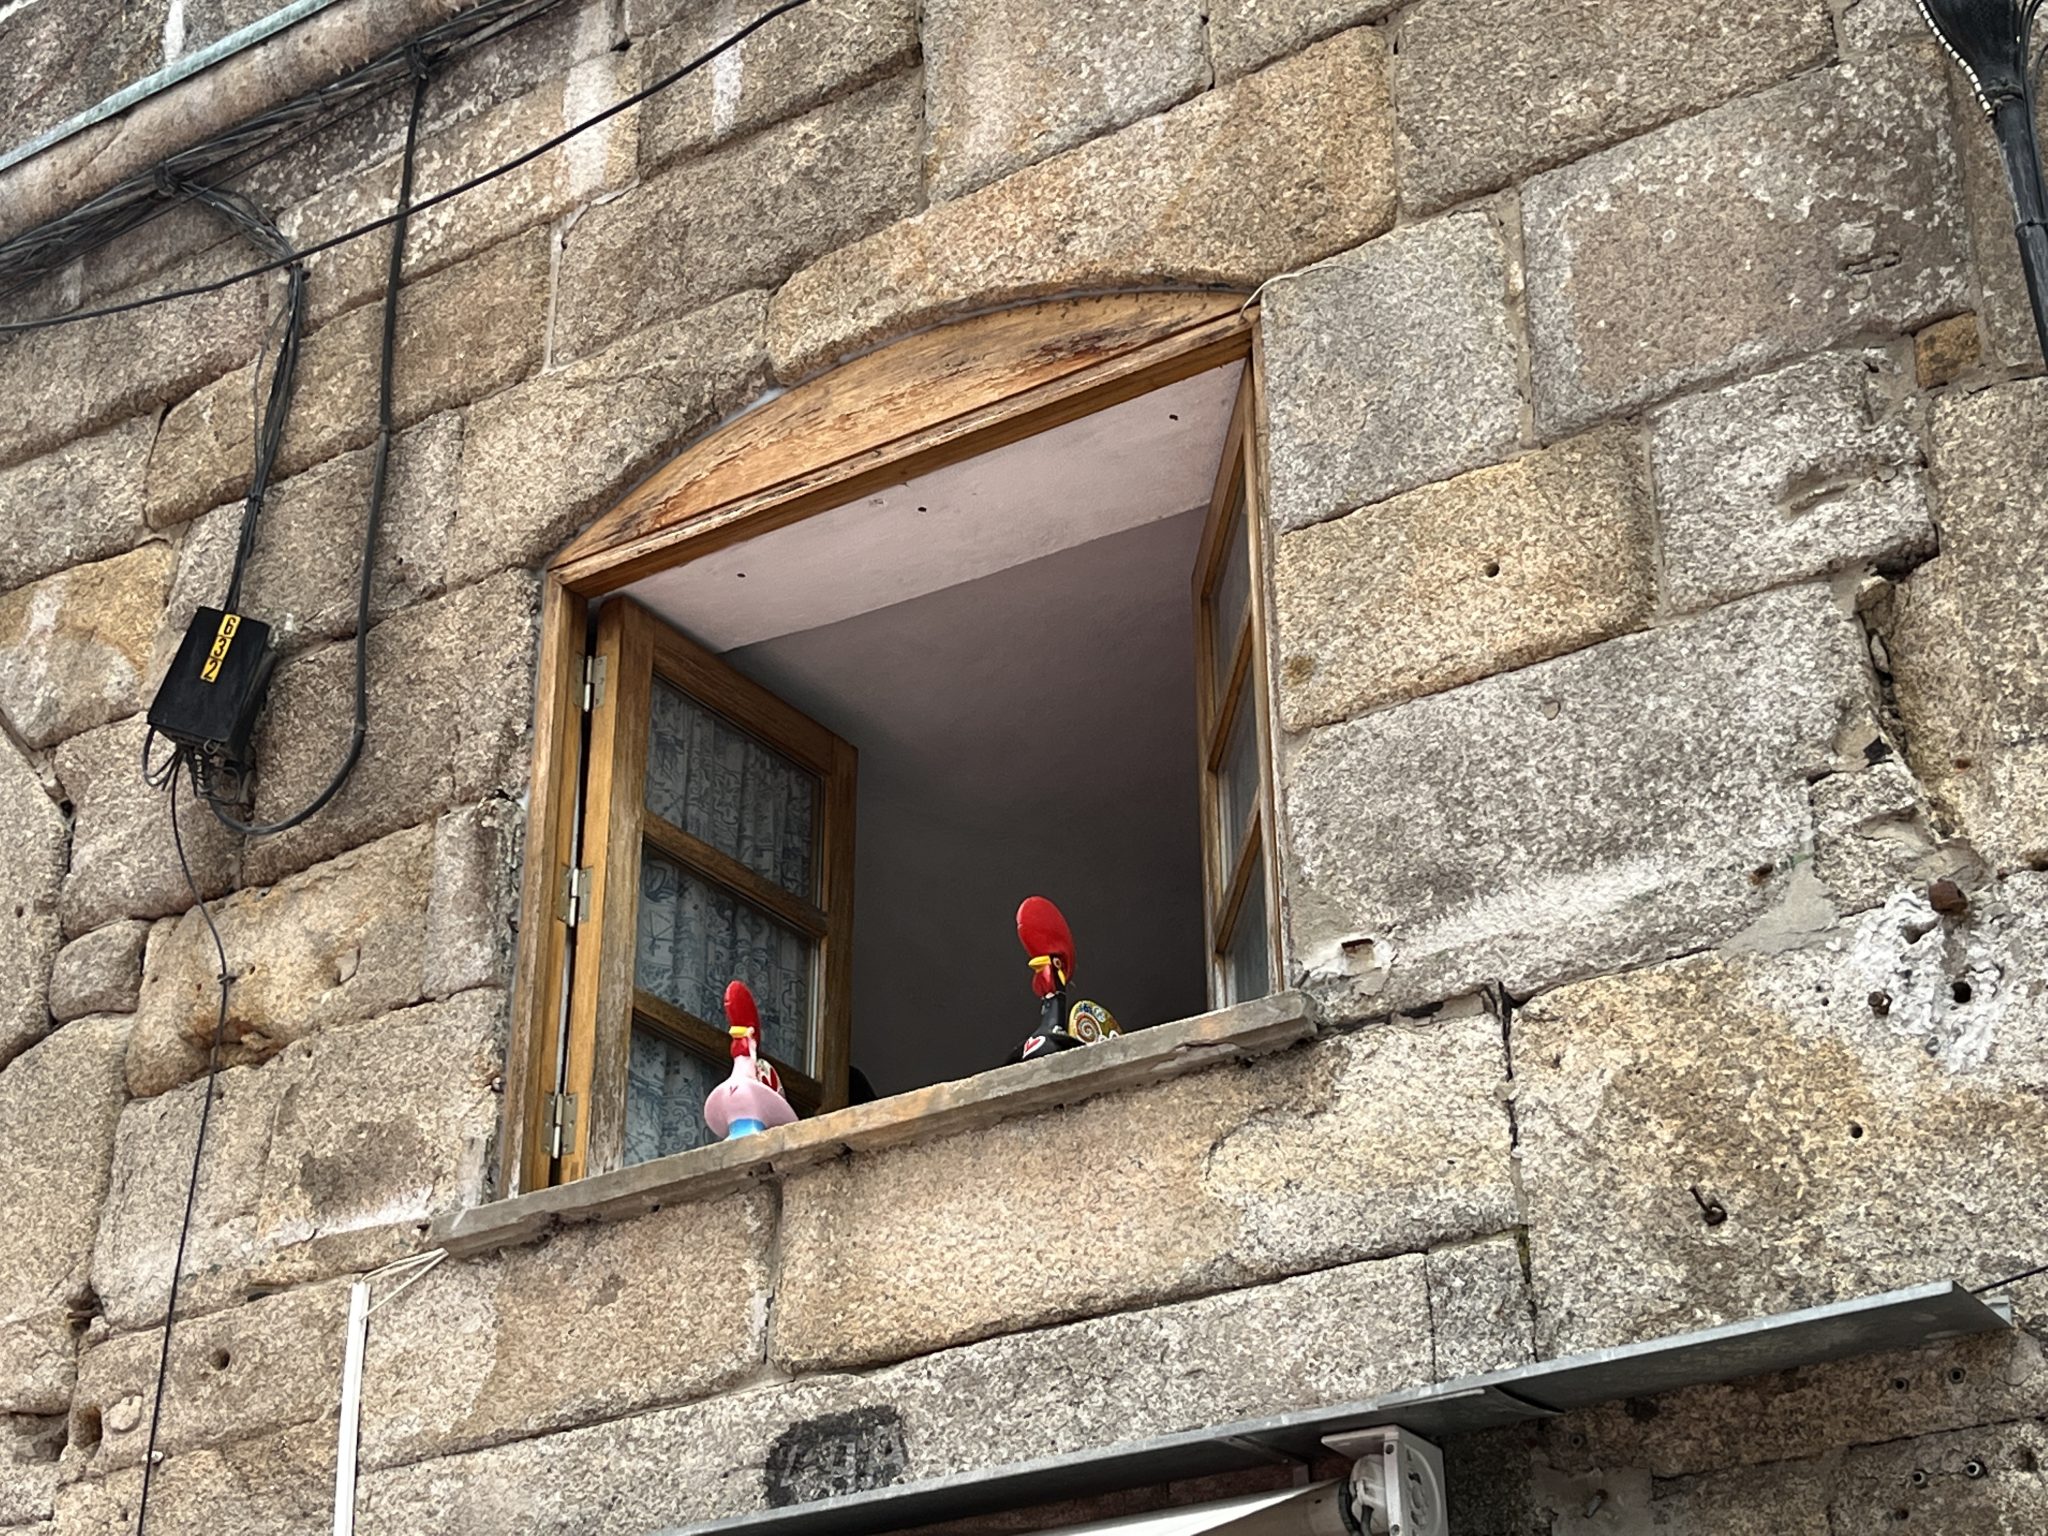 Metal roosters looking out a window in Porto, Portugal